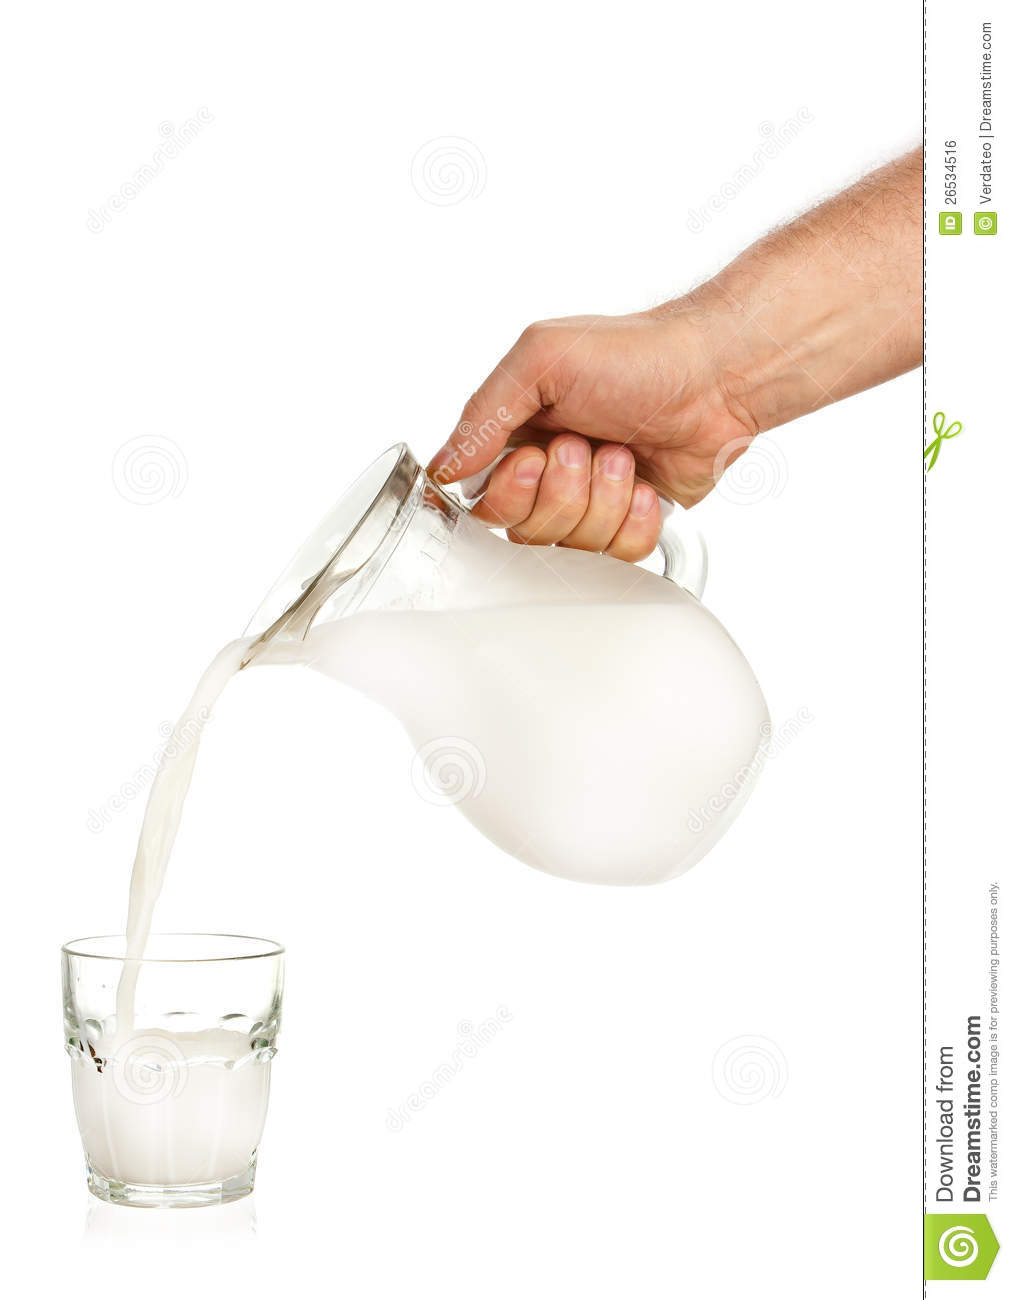 Milk Jug Clip Art Hand Pouring Milk From Jug To